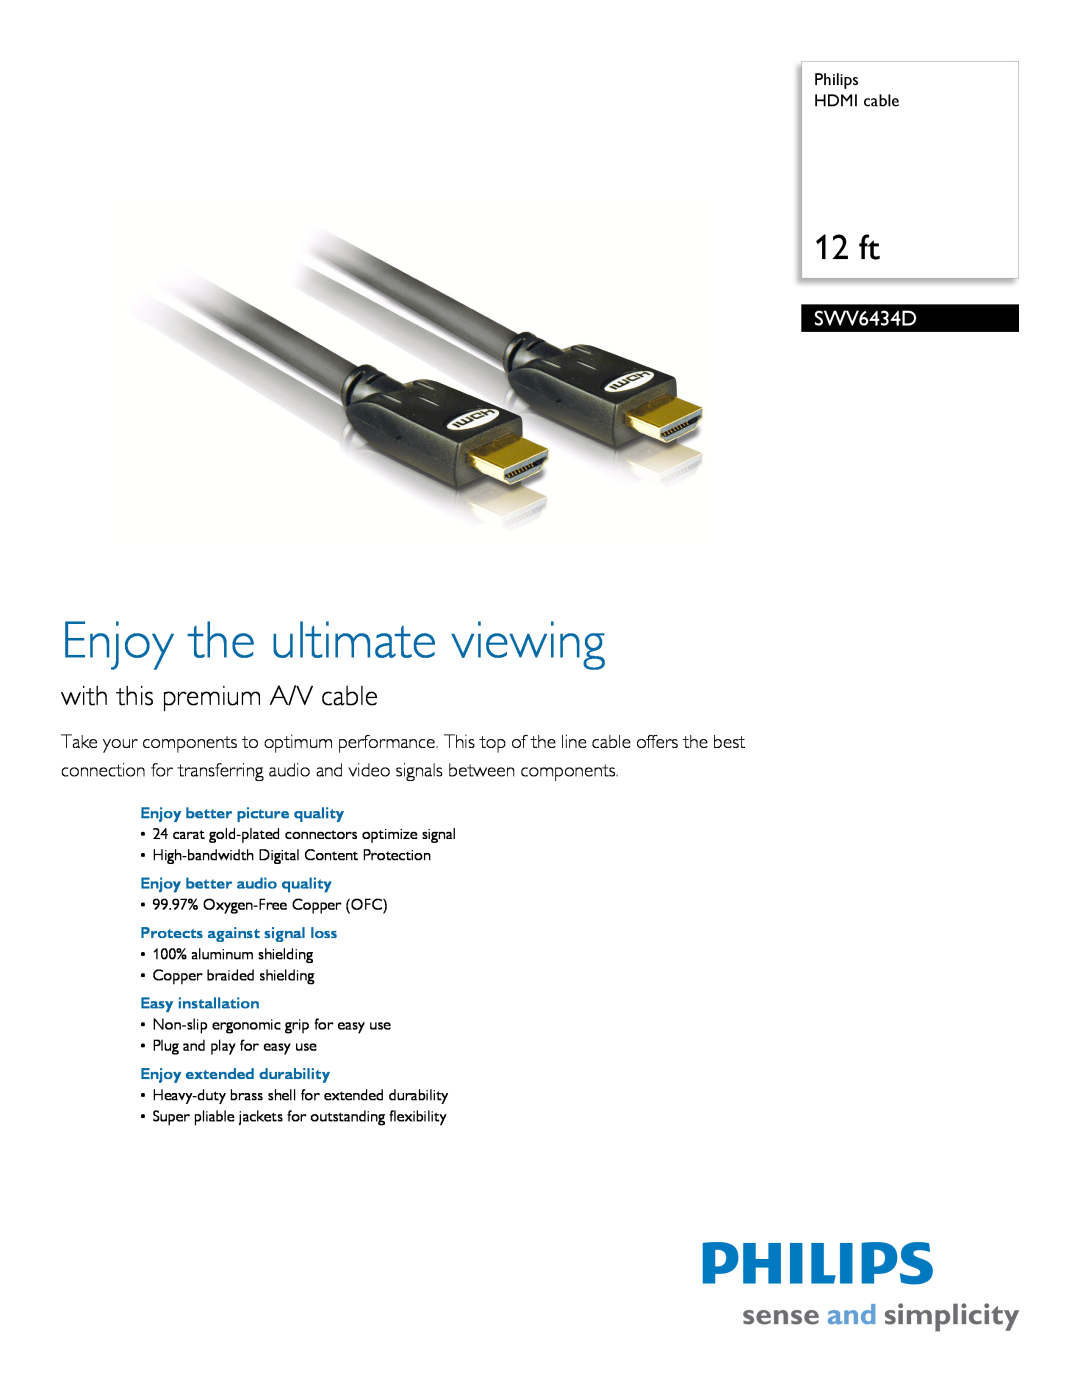 Philips SWV6434D manual Philips HDMI cable, Enjoy the ultimate viewing, 12 ft, with this premium A/V cable 